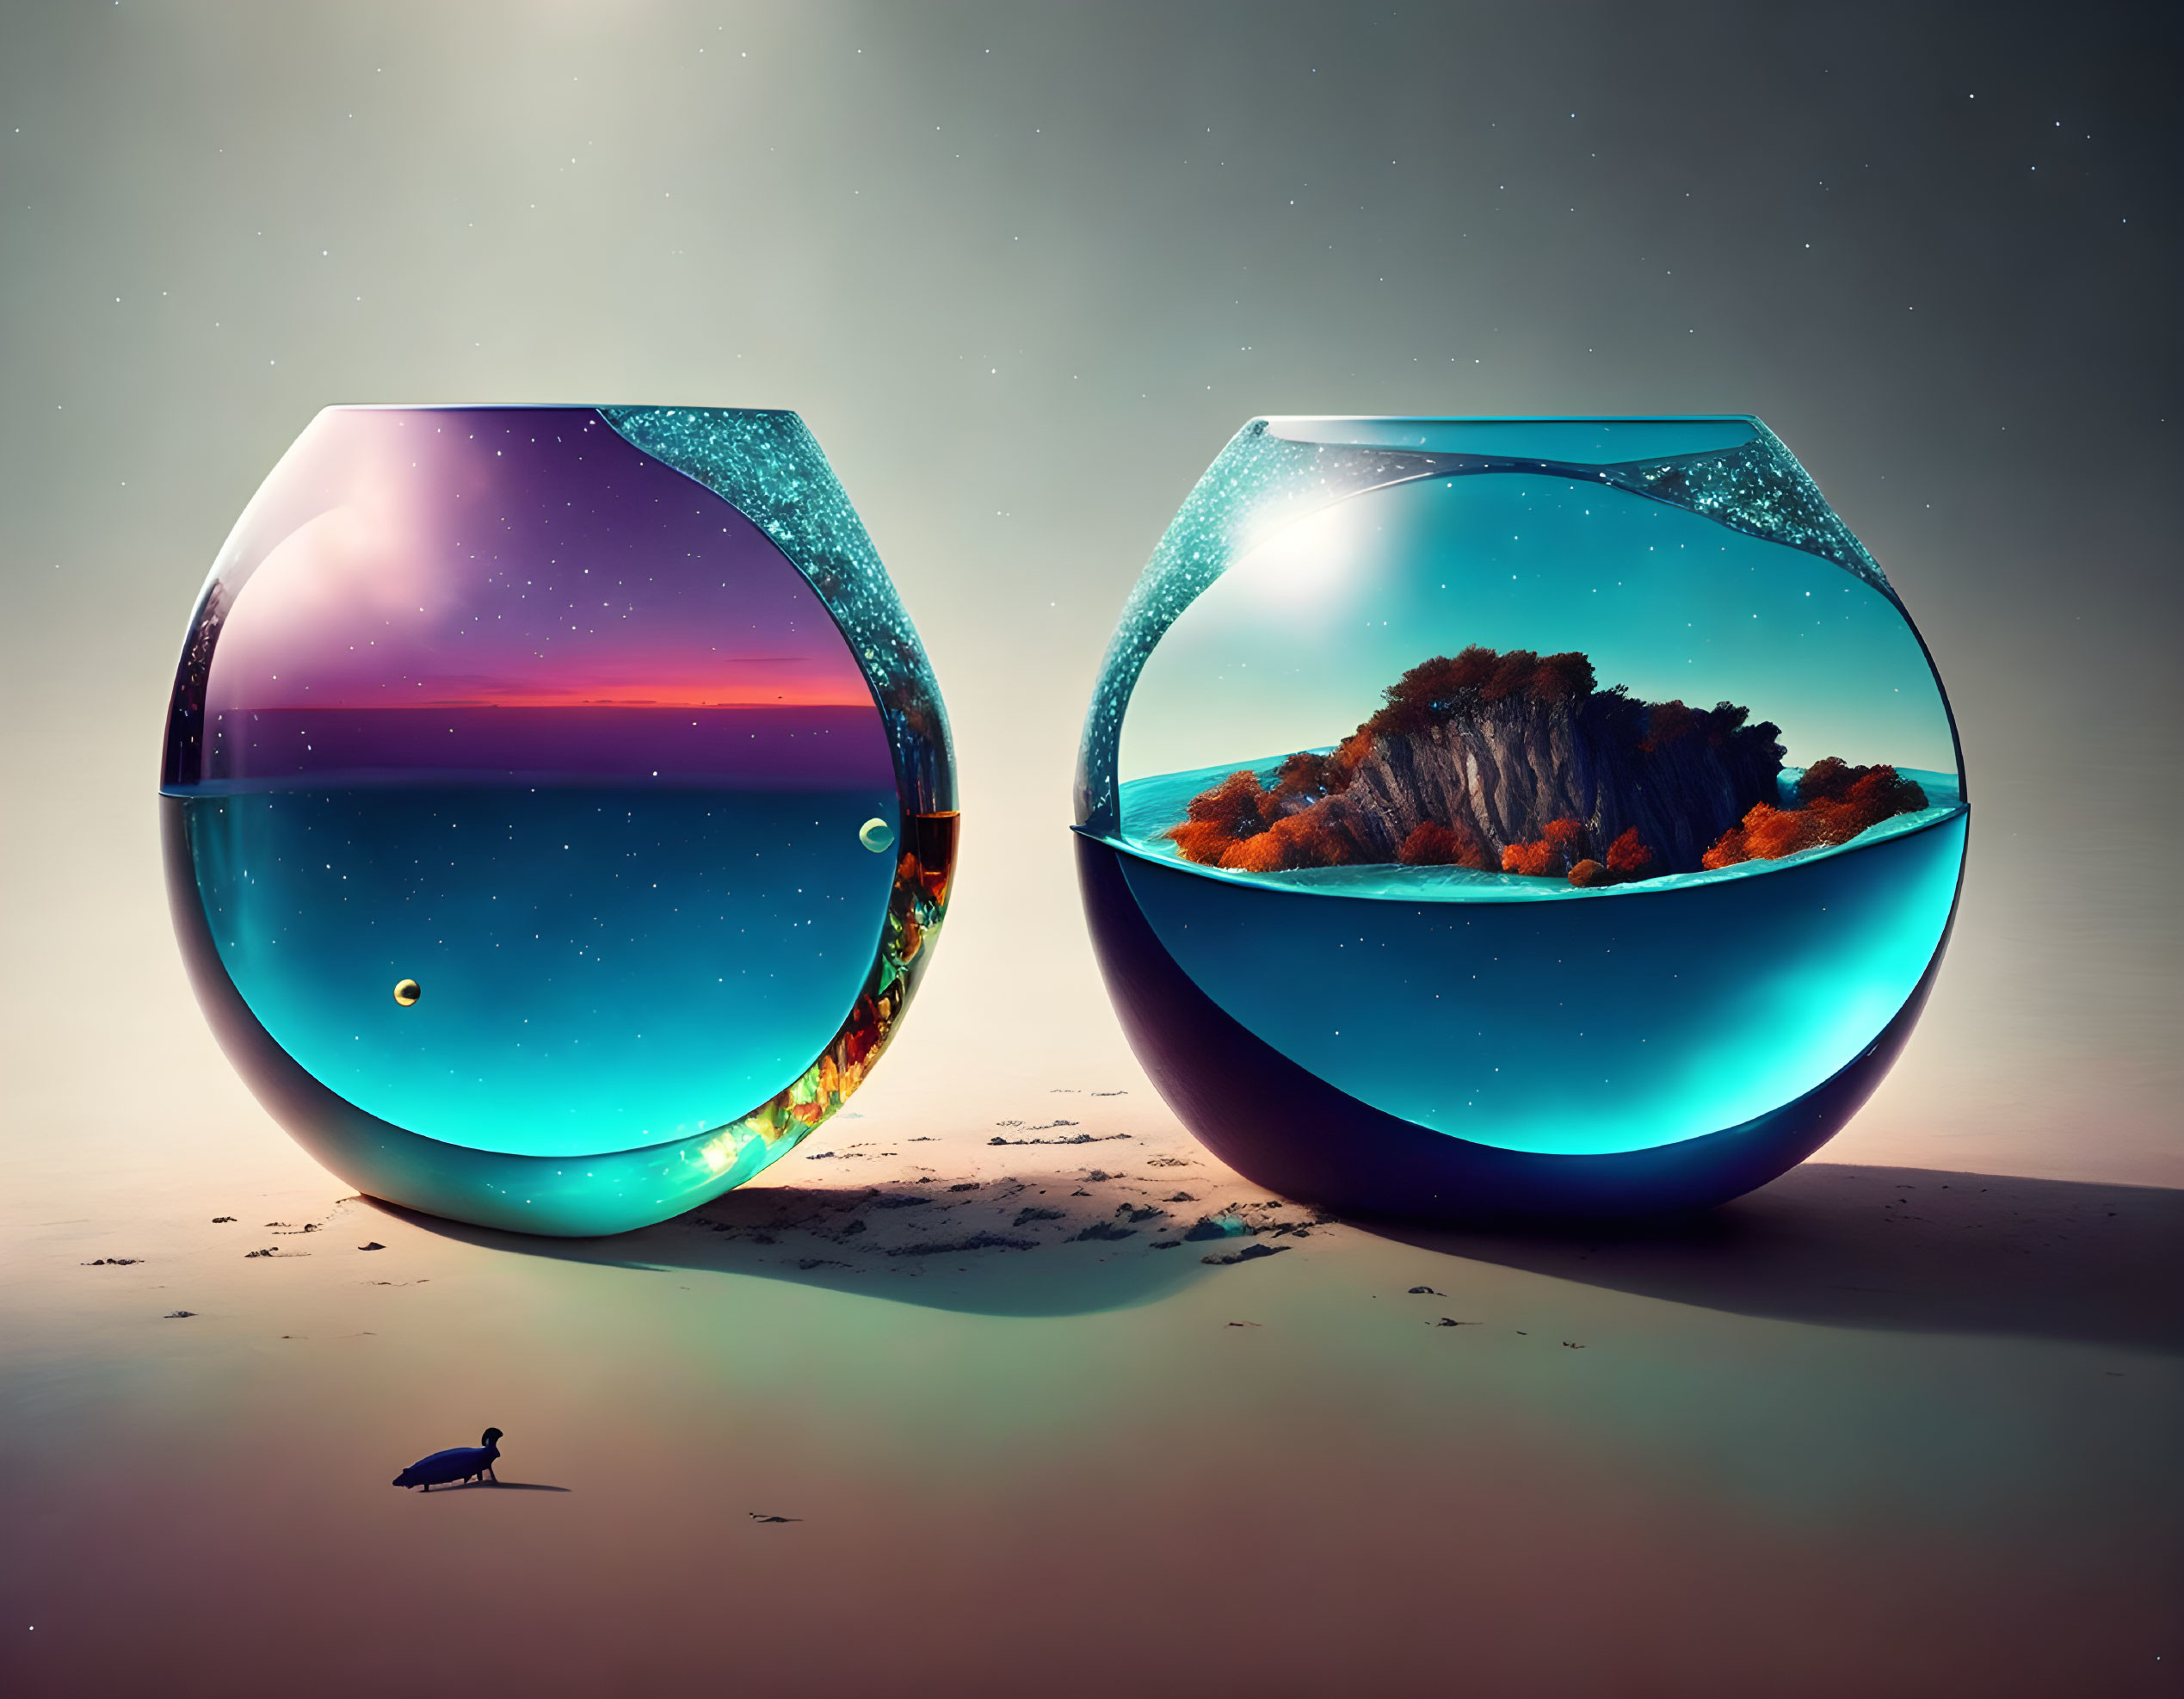 Surreal fishbowl with starry night and island scenes on sandy surface